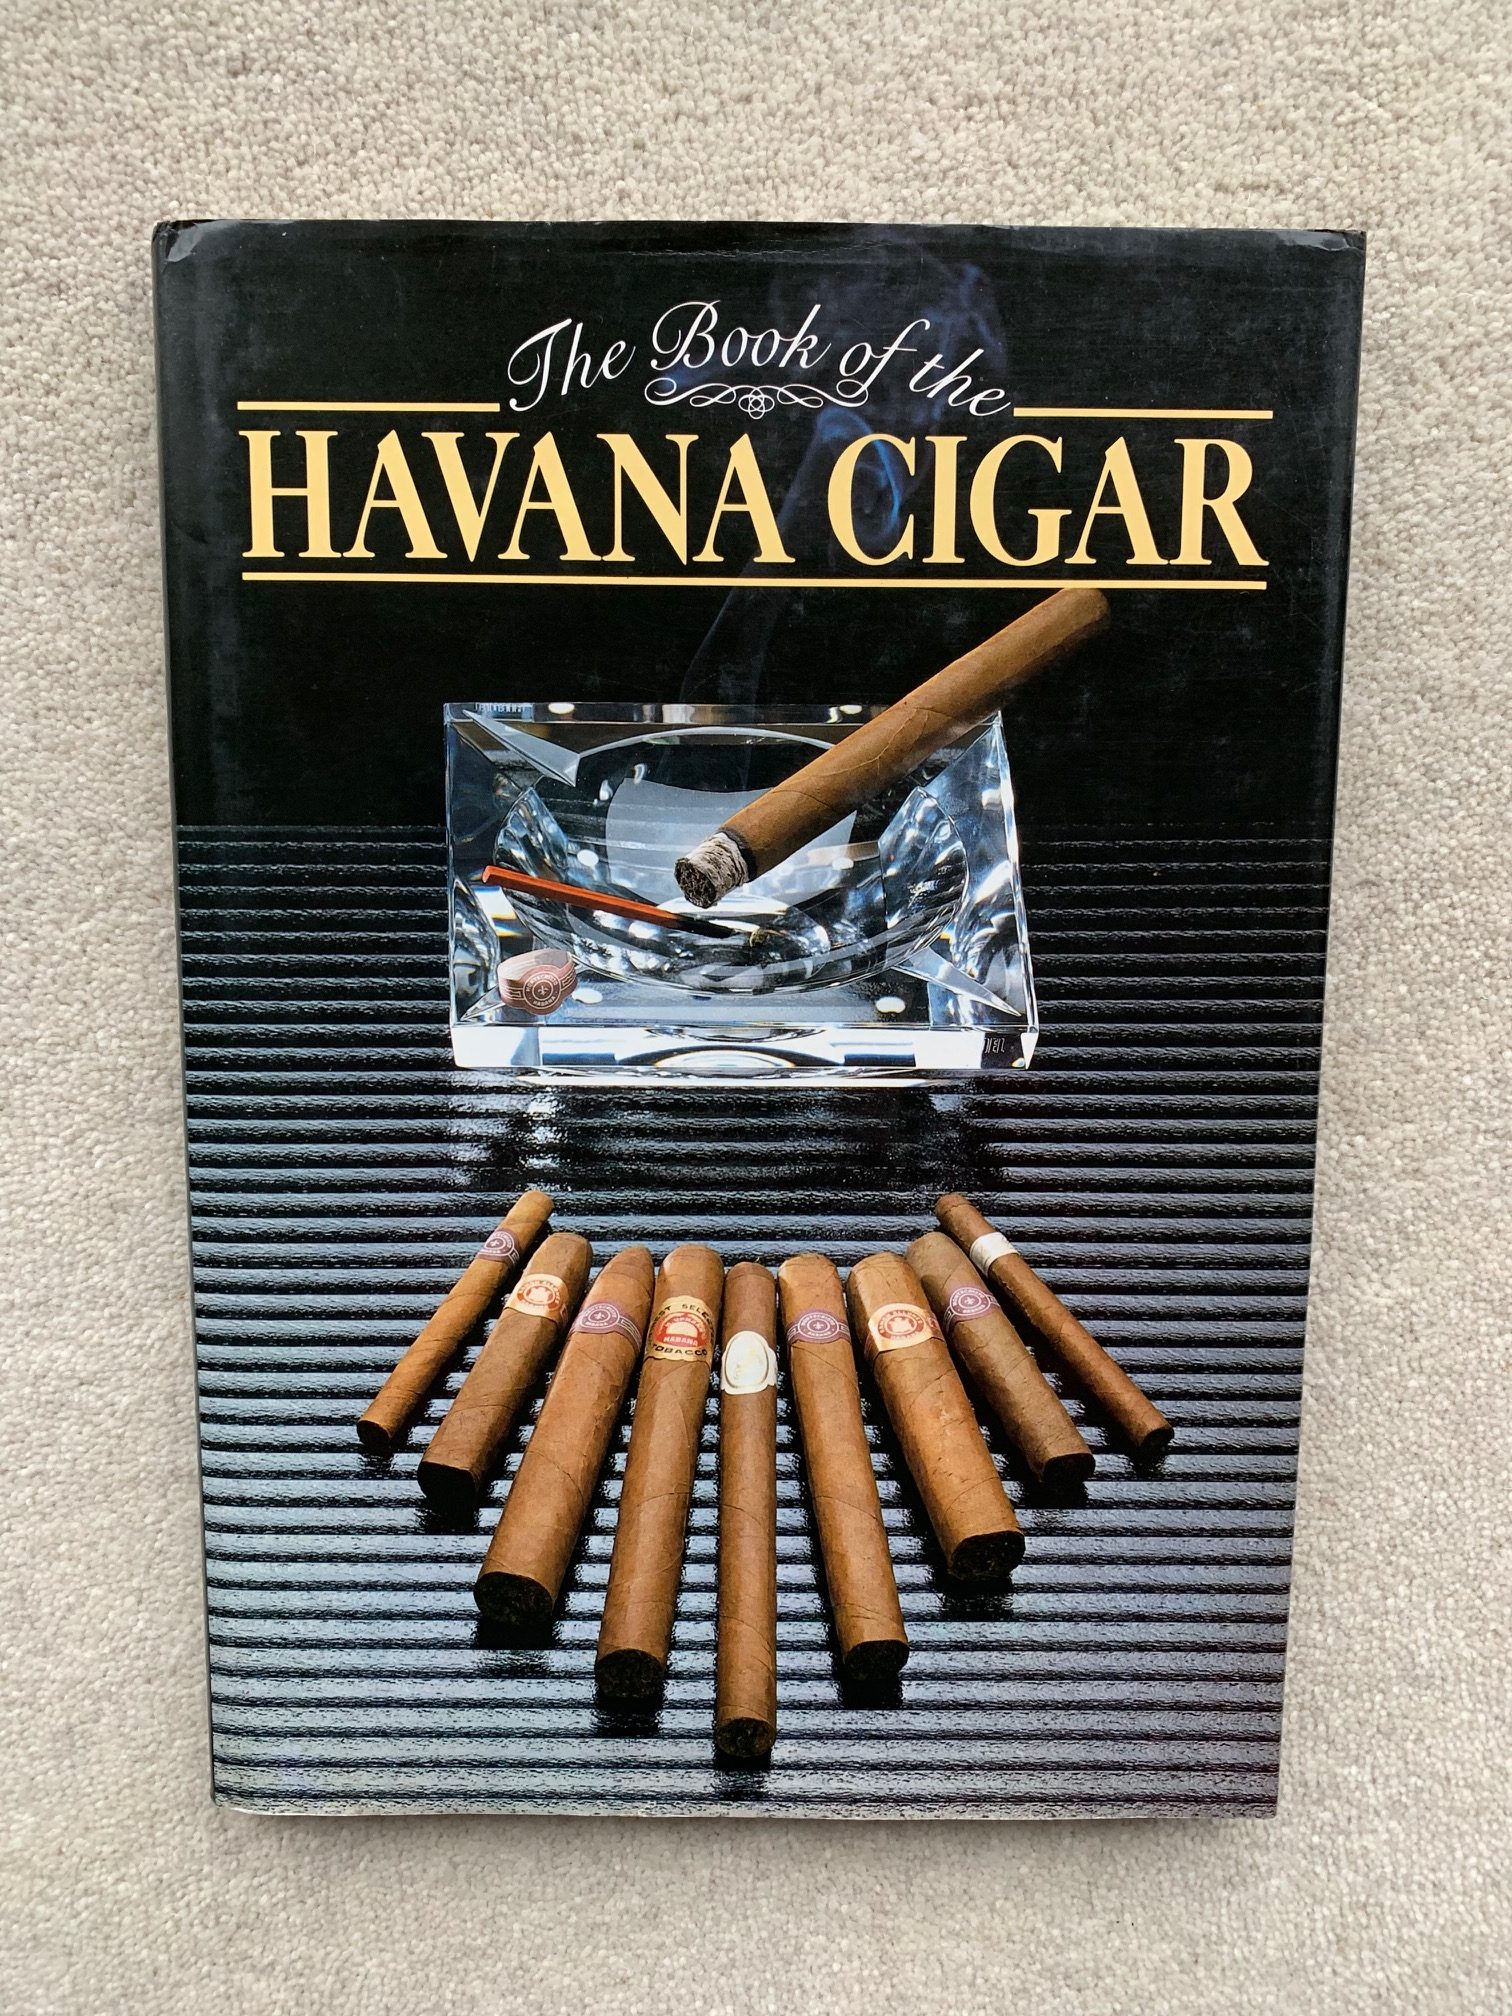 The Book of the Havana Cigar - Brian Innes Image